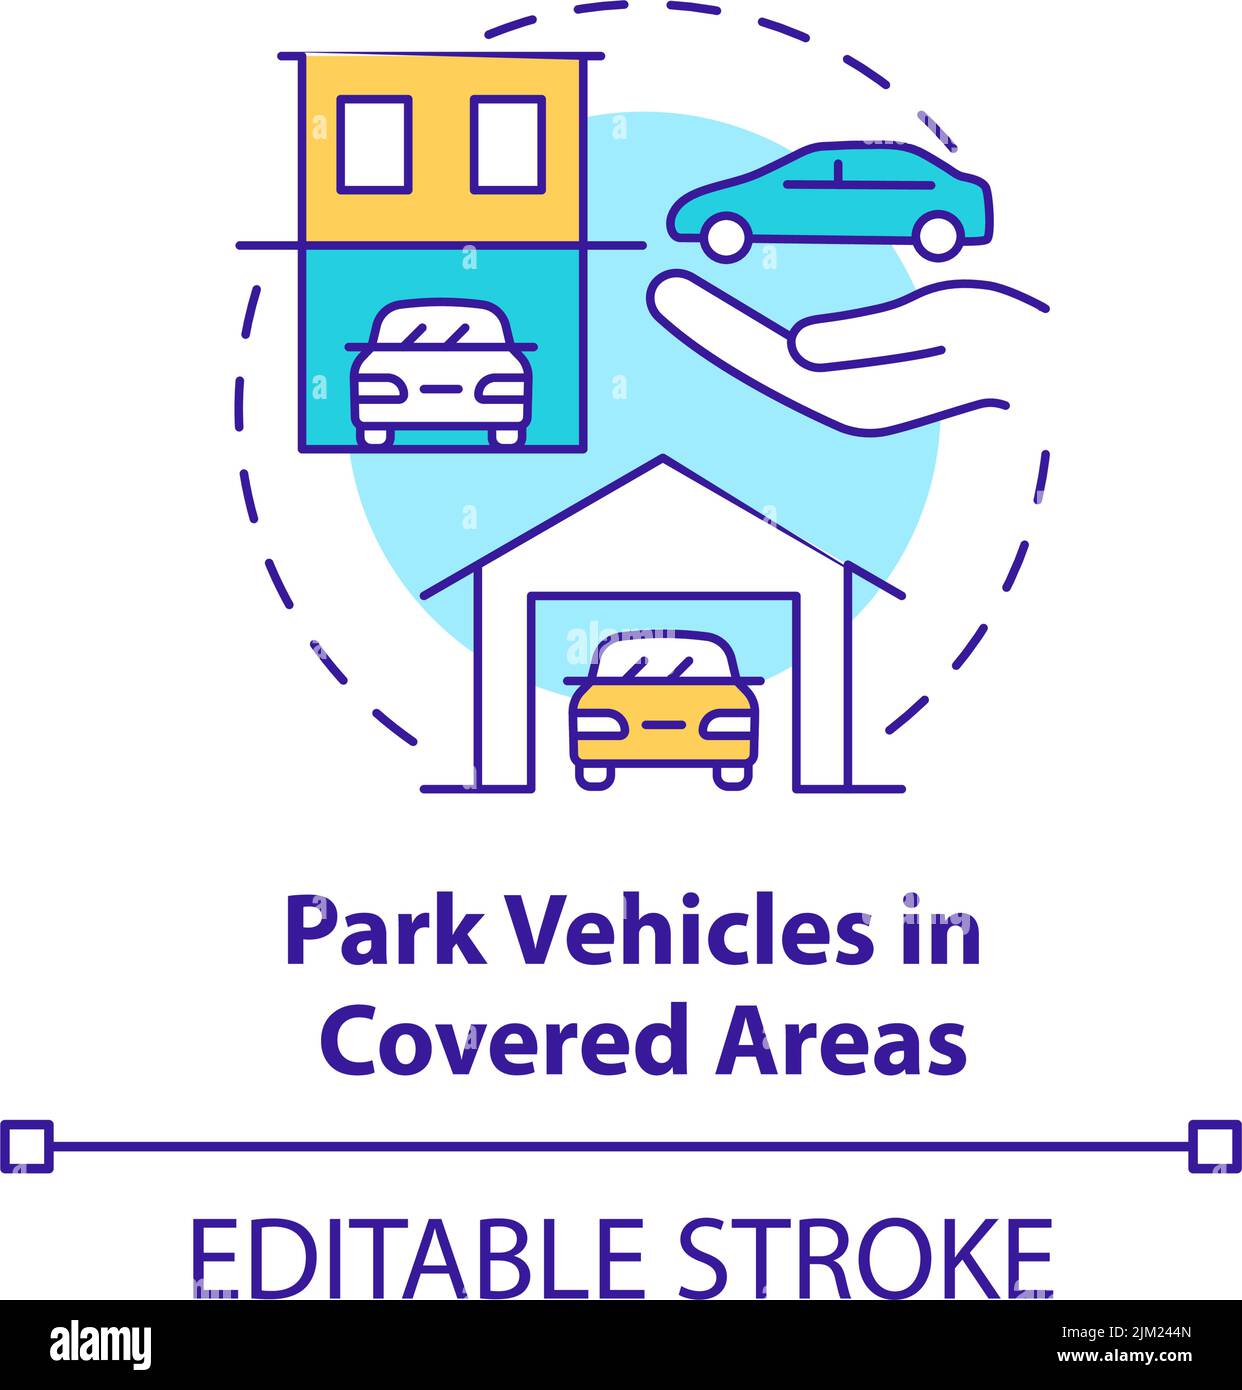 Park vehicles in covered areas concept icon Stock Vector